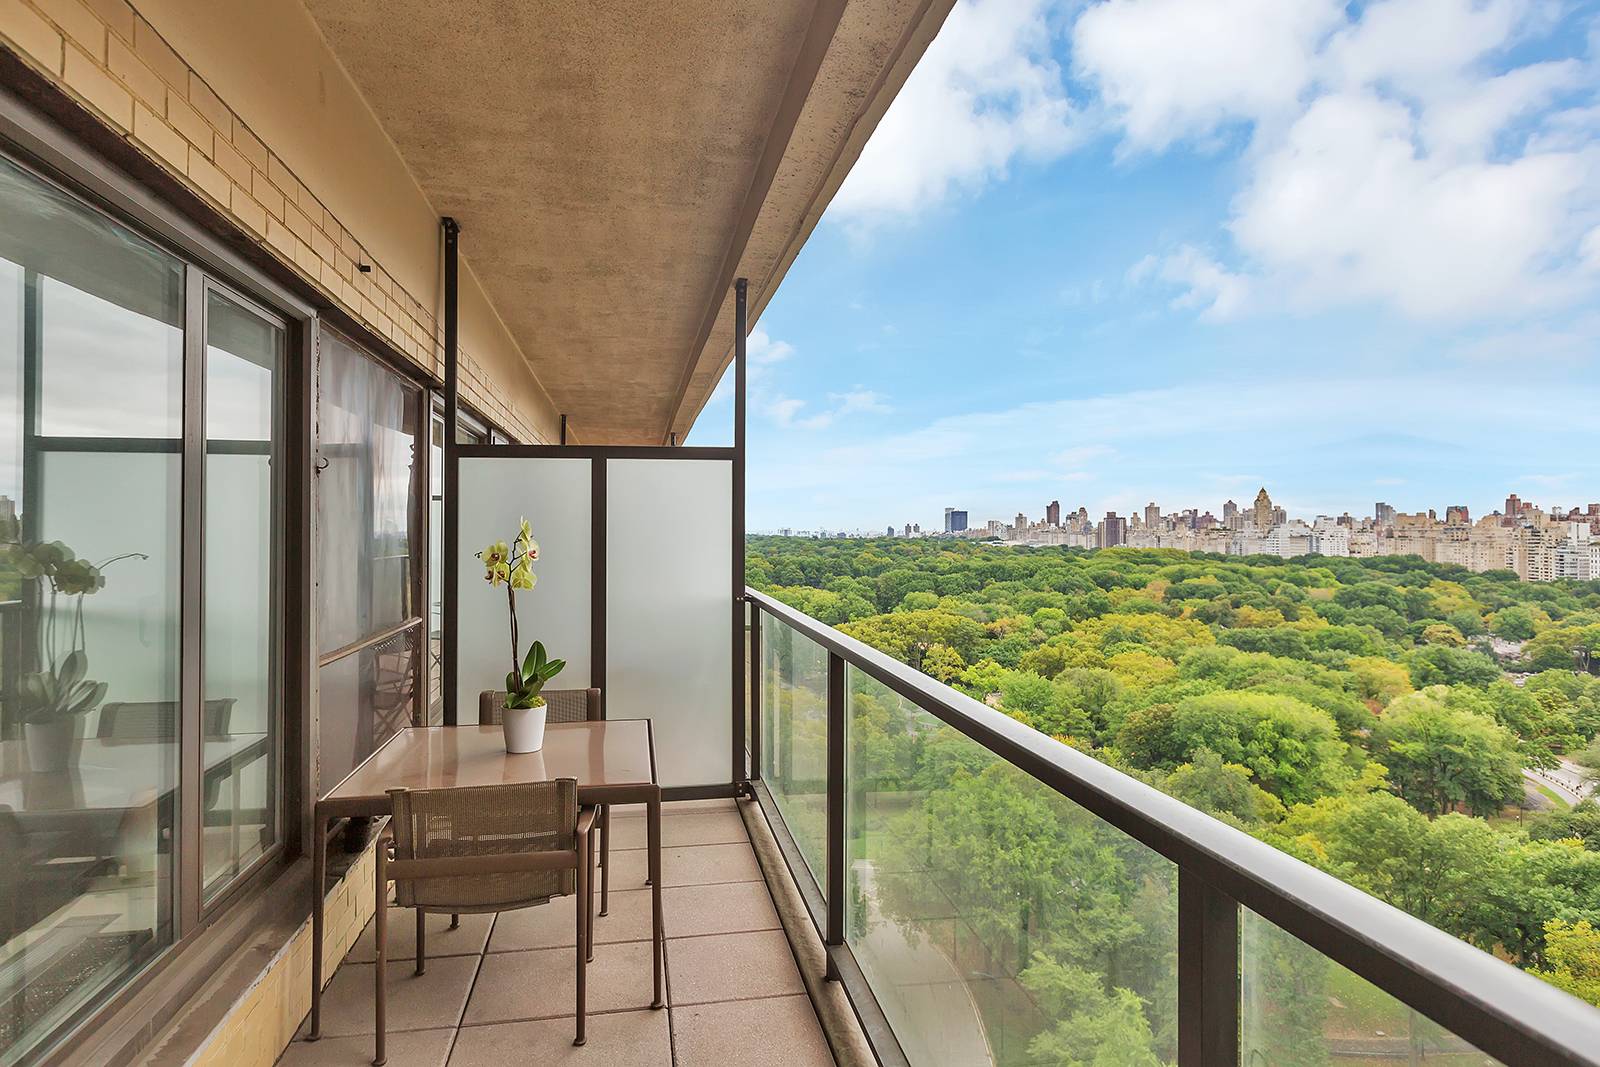 No Broker Fee!!!   Limited Time Only!!!   Tremendous Midtown West Convertible 3 Bedroom Apartment with 2.5 Baths featuring a Health Club and Rooftop Deck